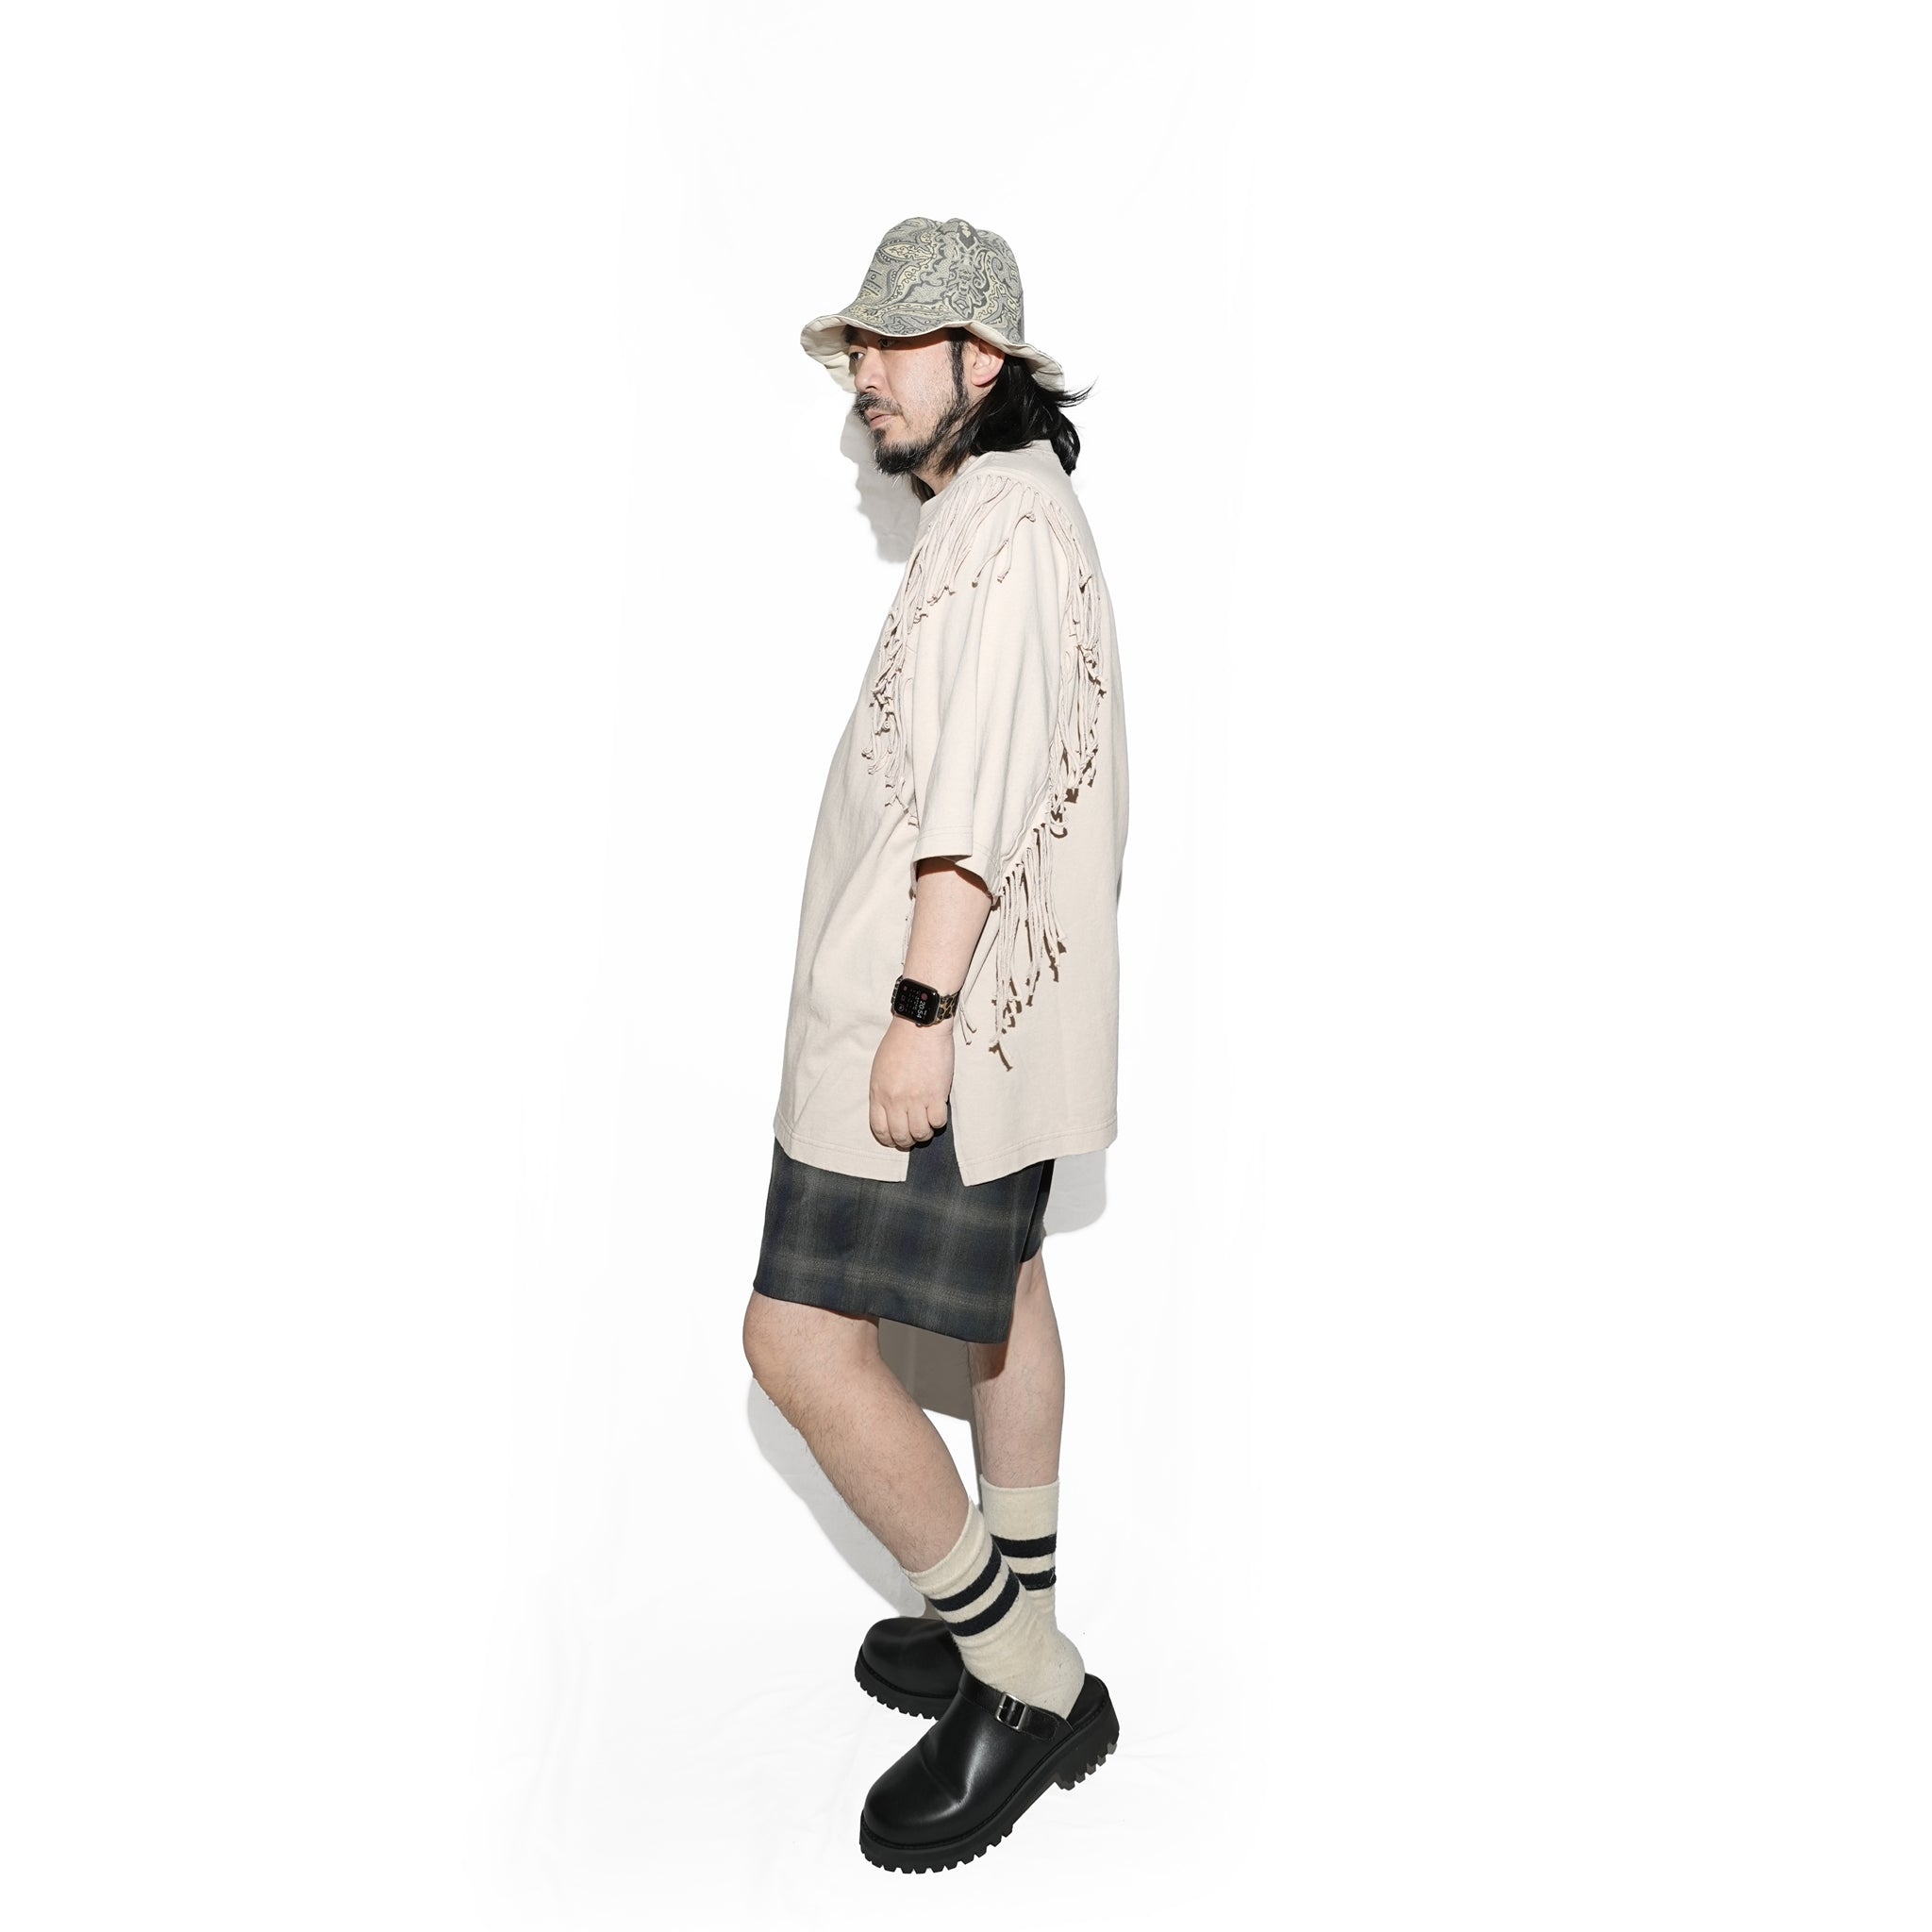 No:CT24S-SH03 | Name:izk_wide shorts100 | Color:Grn-Gry Check【CEASTERS_ケステル】